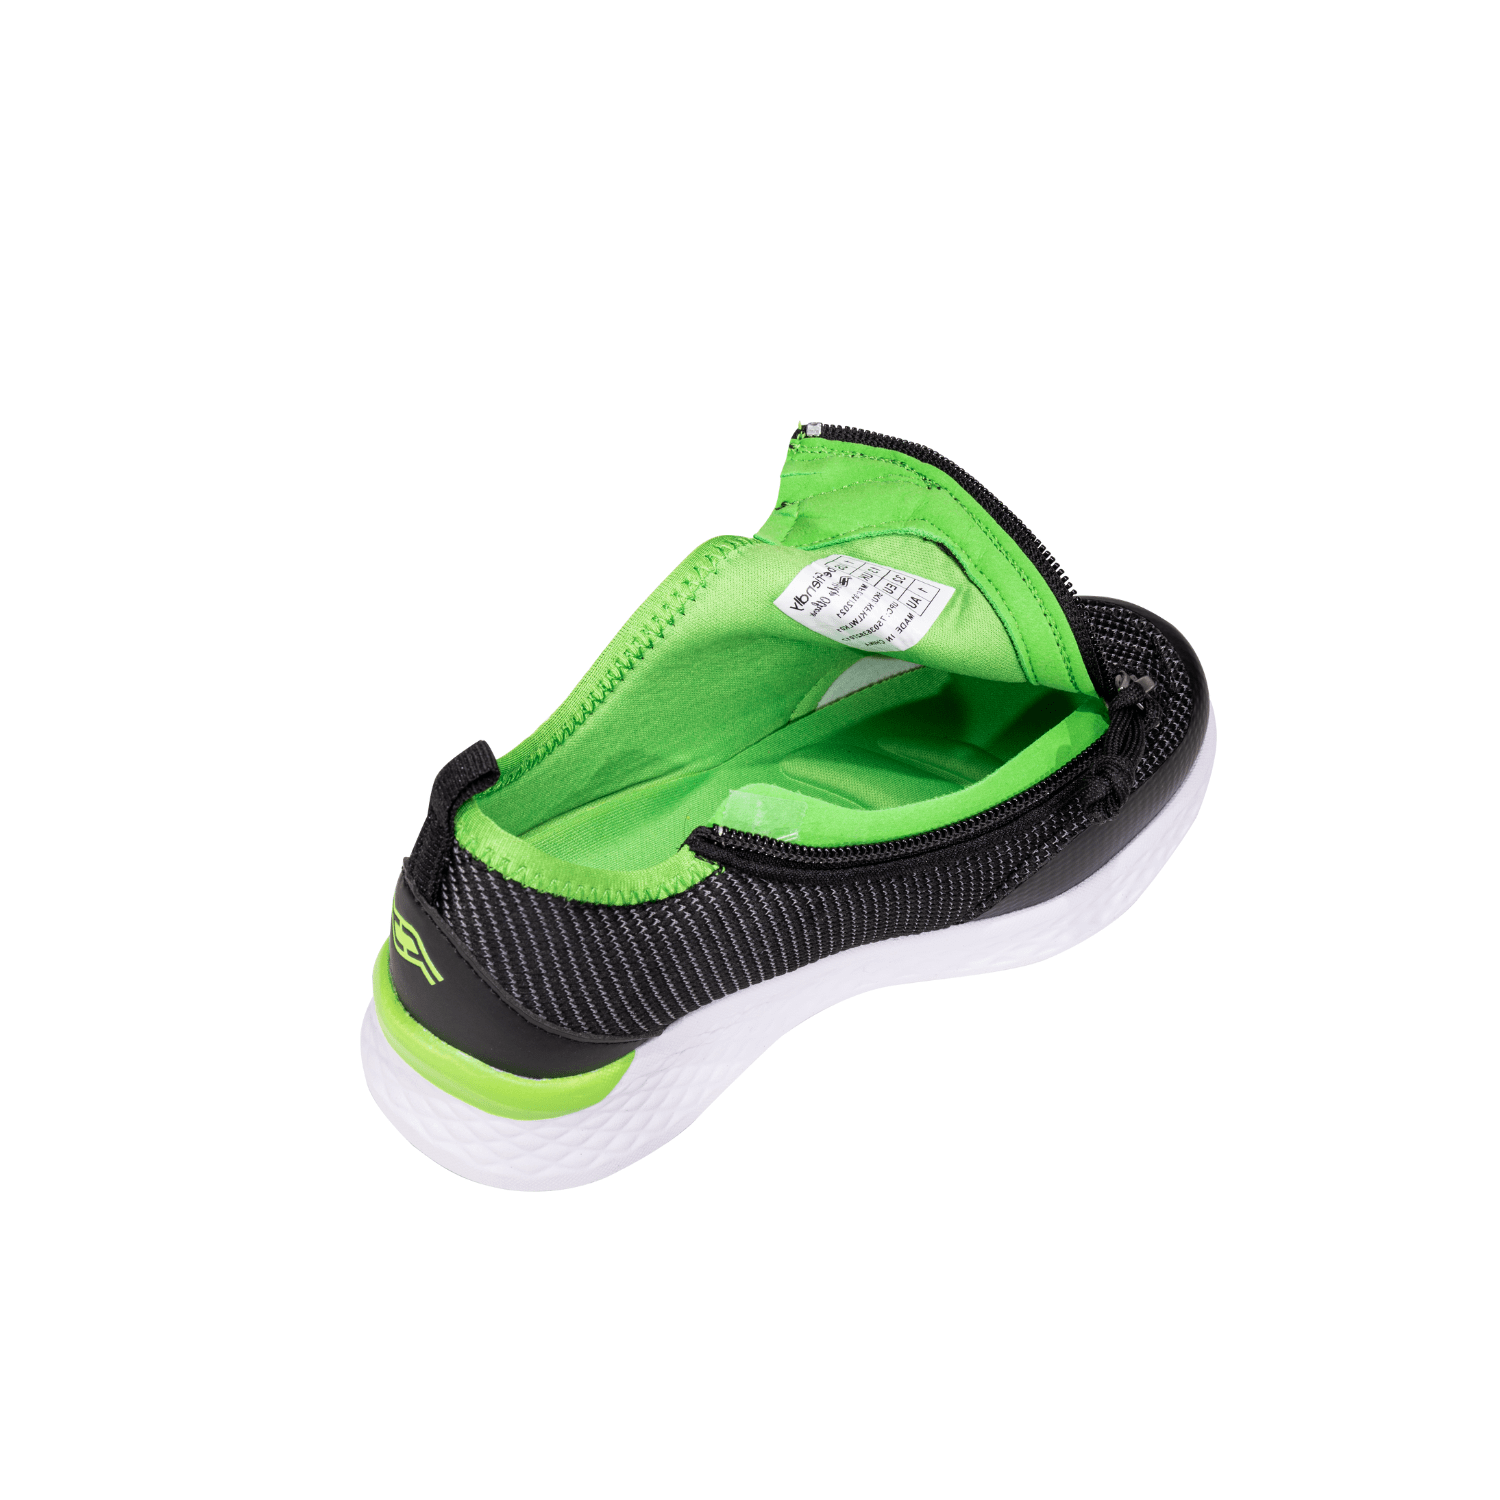 Sizes 2.5-9.5 UK First Shoes for Little Boy Touch Fastener & Natural Leather Insole Football Many Patterns: Dino 3f freedom for feet Mouse Children's Shoes Boys Kids 1-3 Years T-Rex 